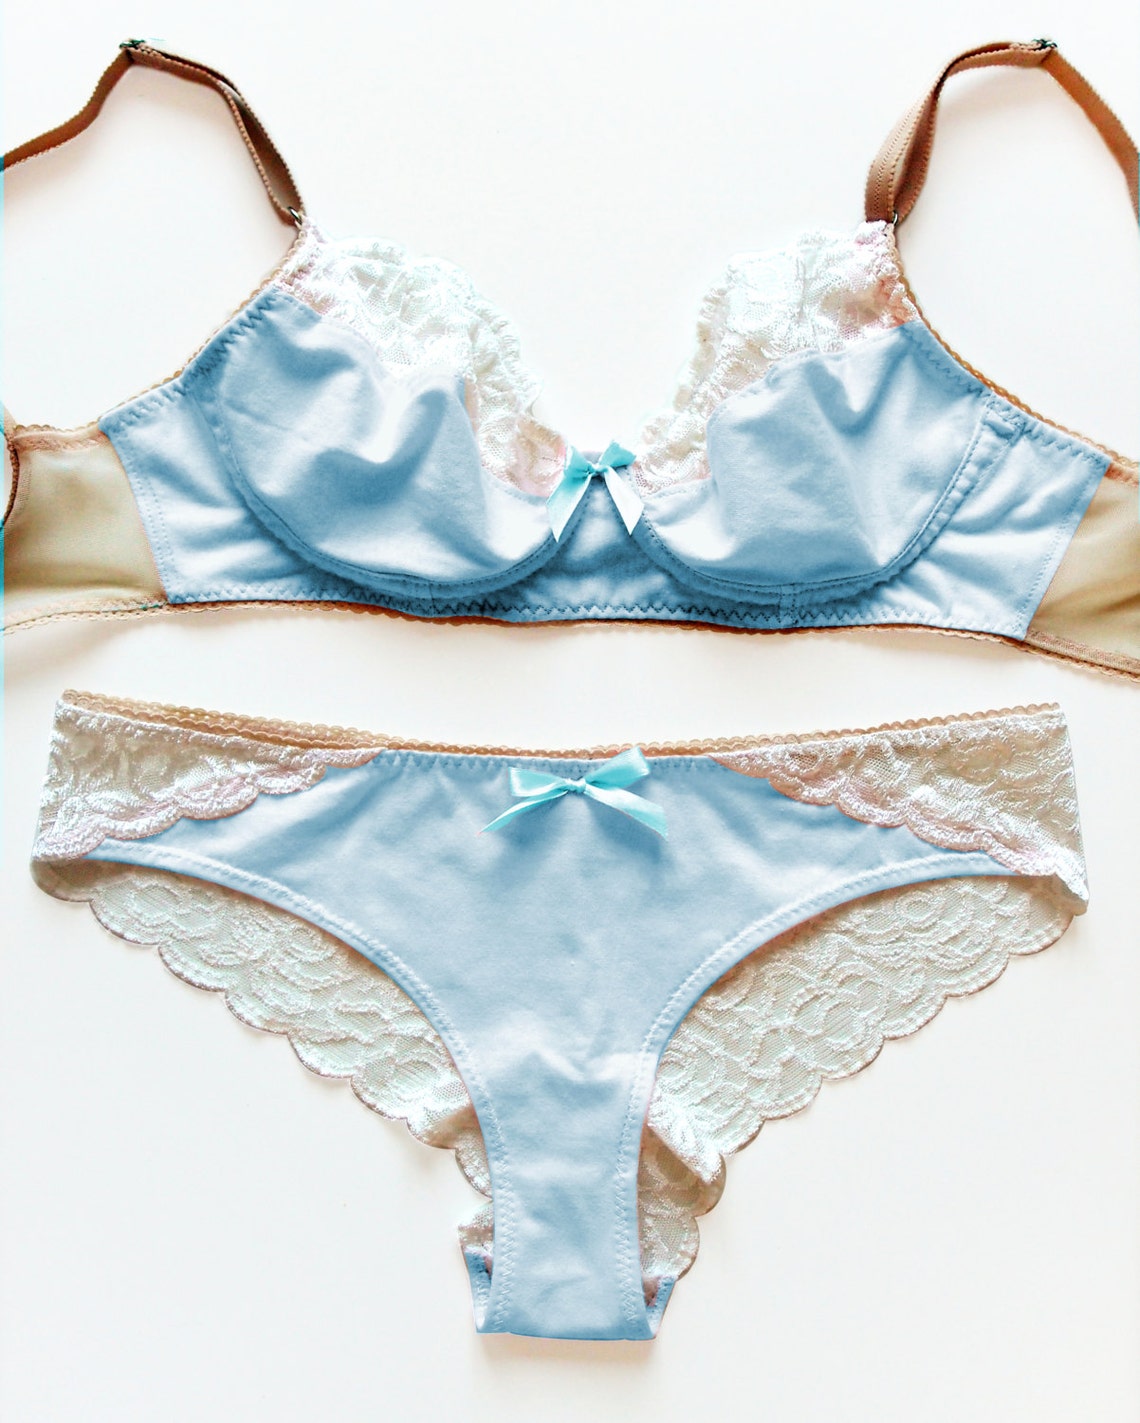 Baby Blue Cotton and Lace Lingerie Set Soft Bra and | Etsy